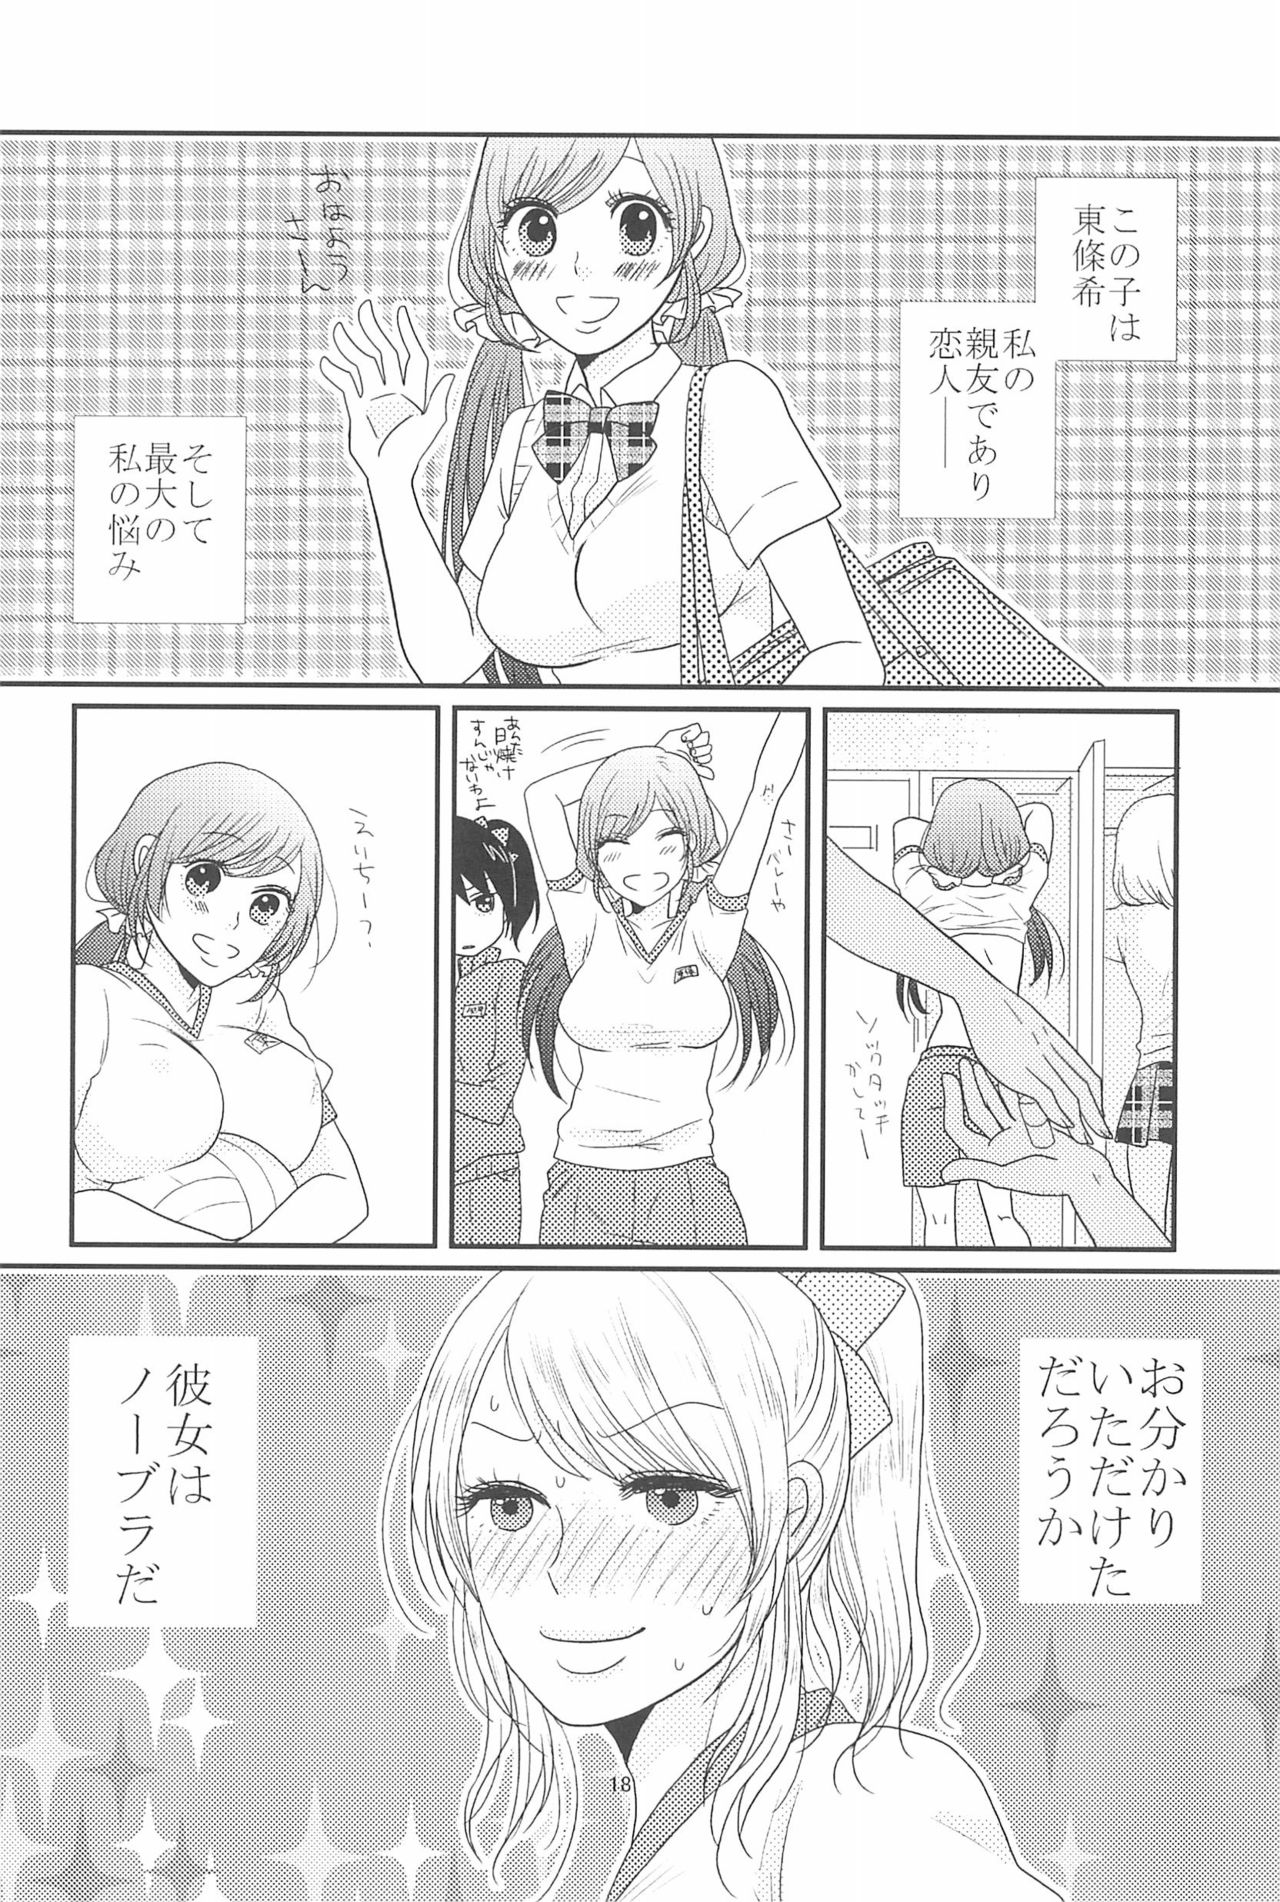 (C90) [BK*N2 (Mikawa Miso)] HAPPY GO LUCKY DAYS (Love Live!) page 22 full